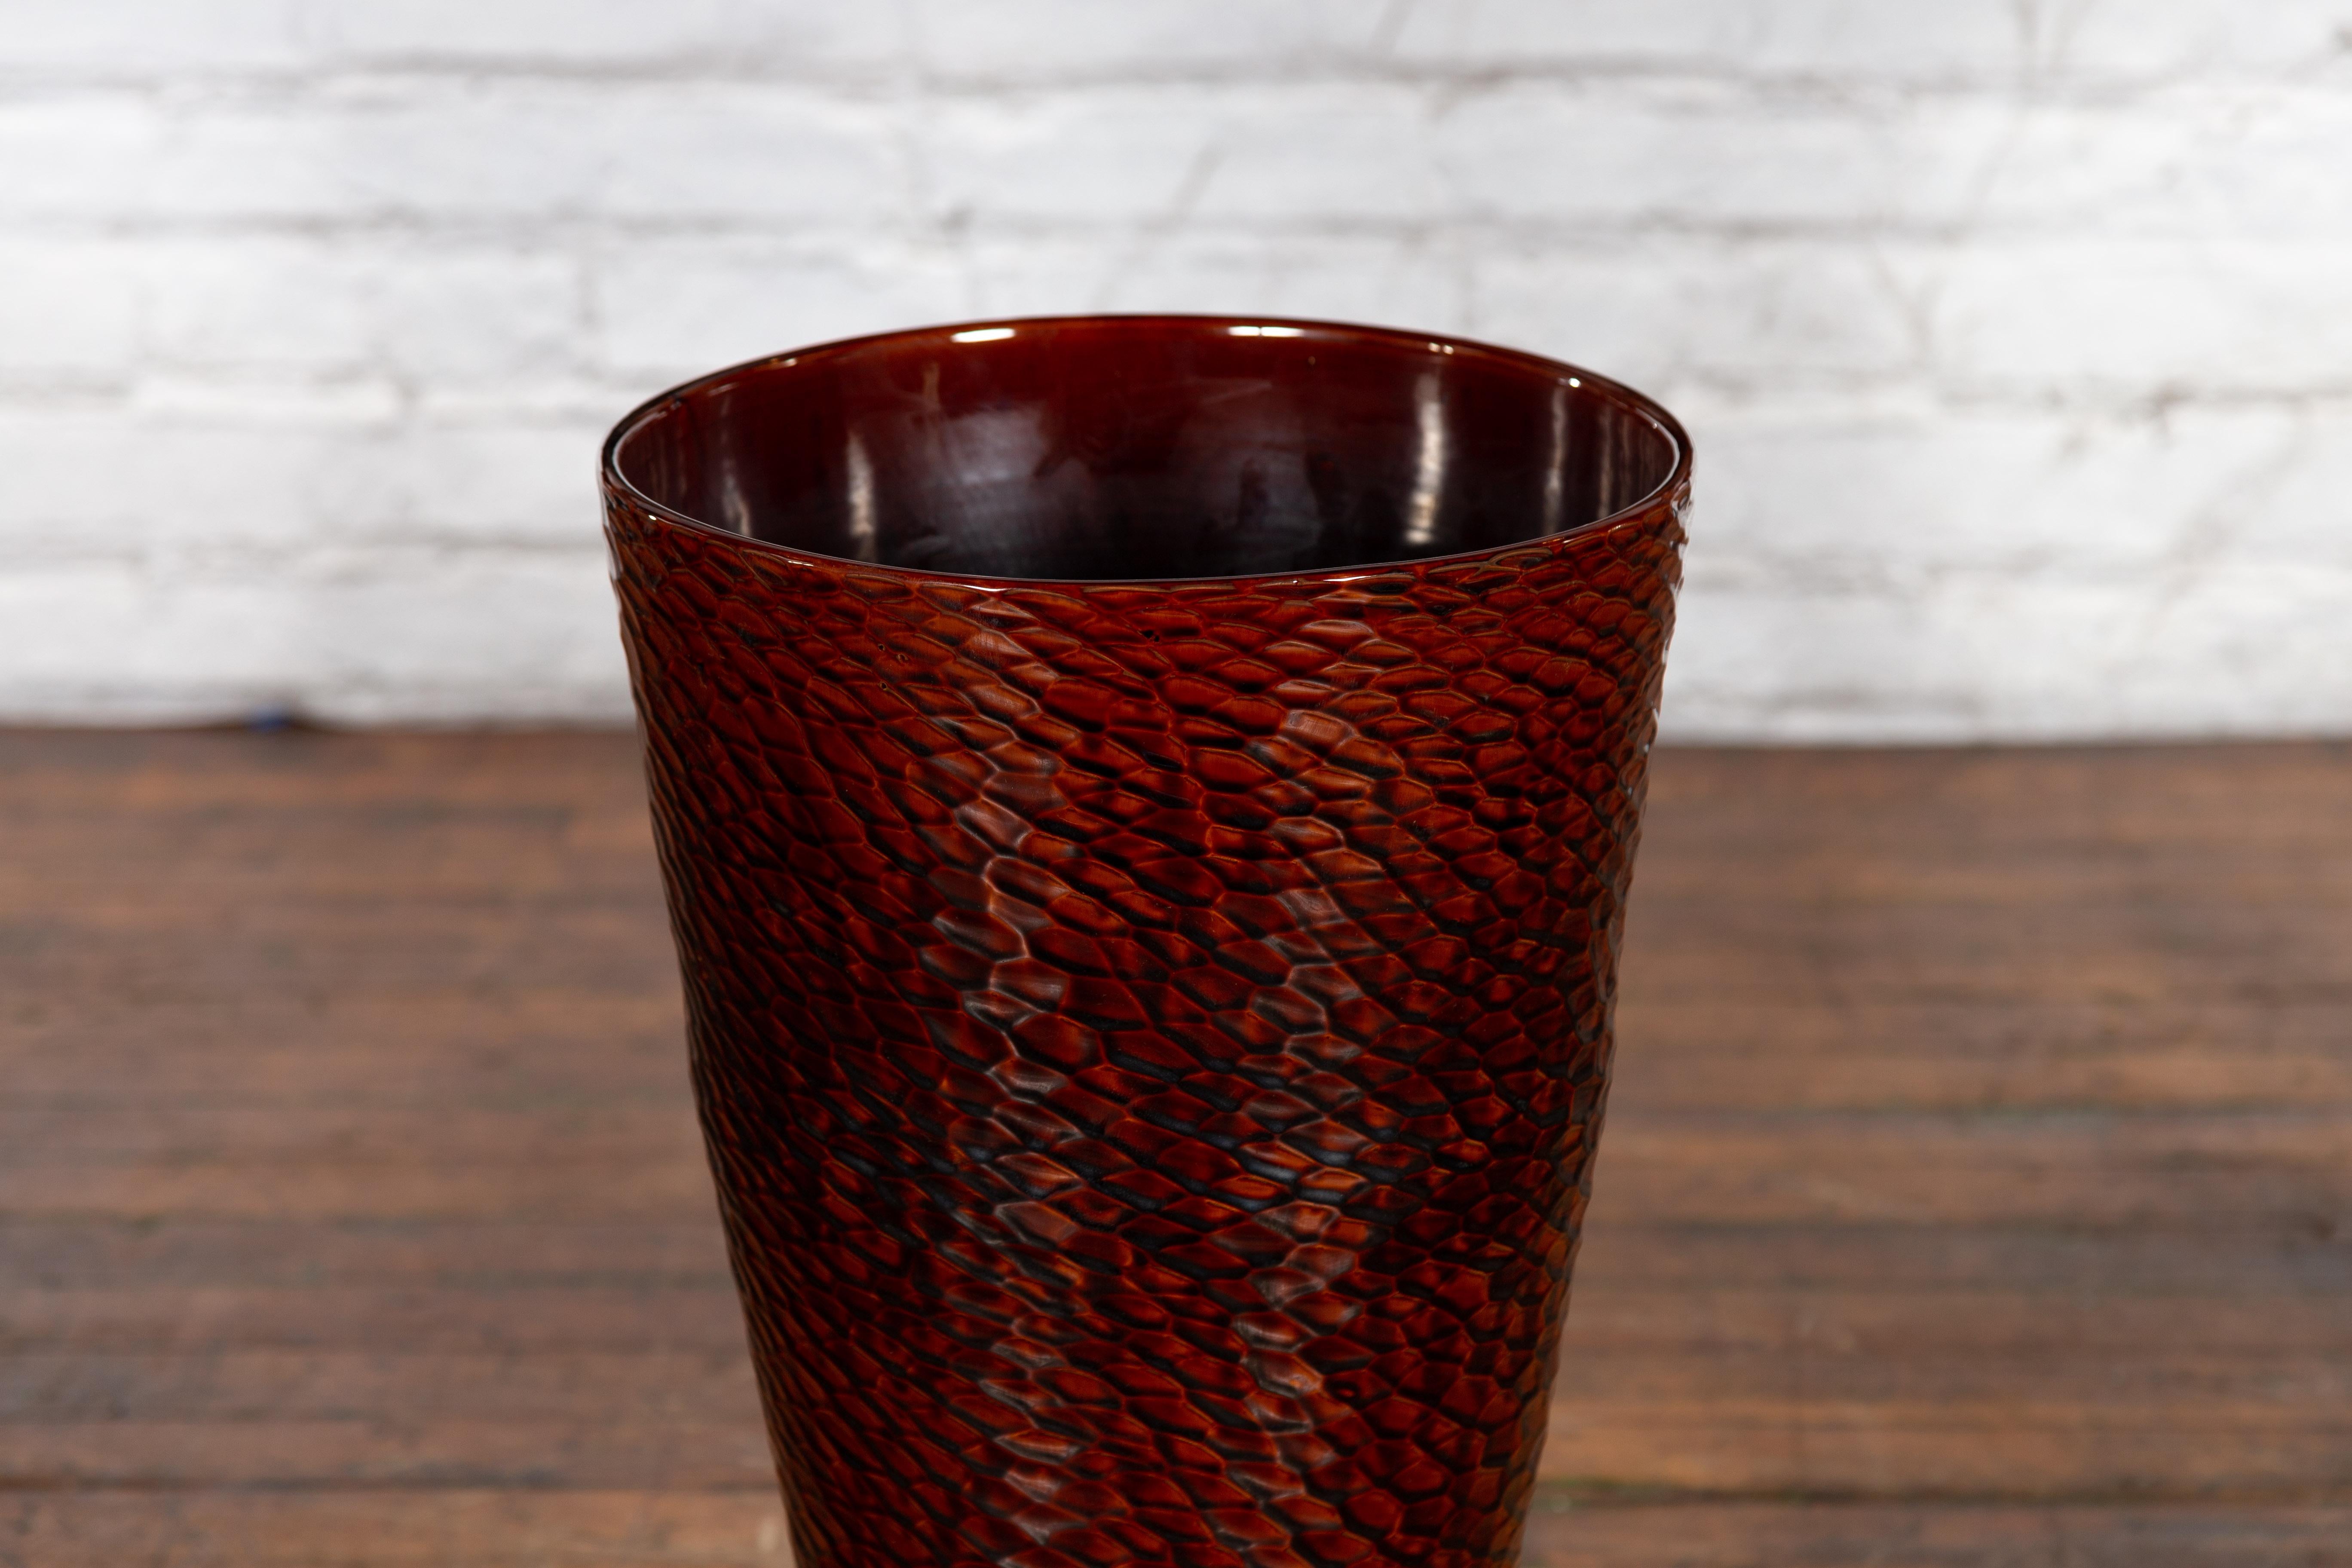 Ceramic Contemporary Prem Collection Artisan Vase with Textured Burgundy Finish For Sale